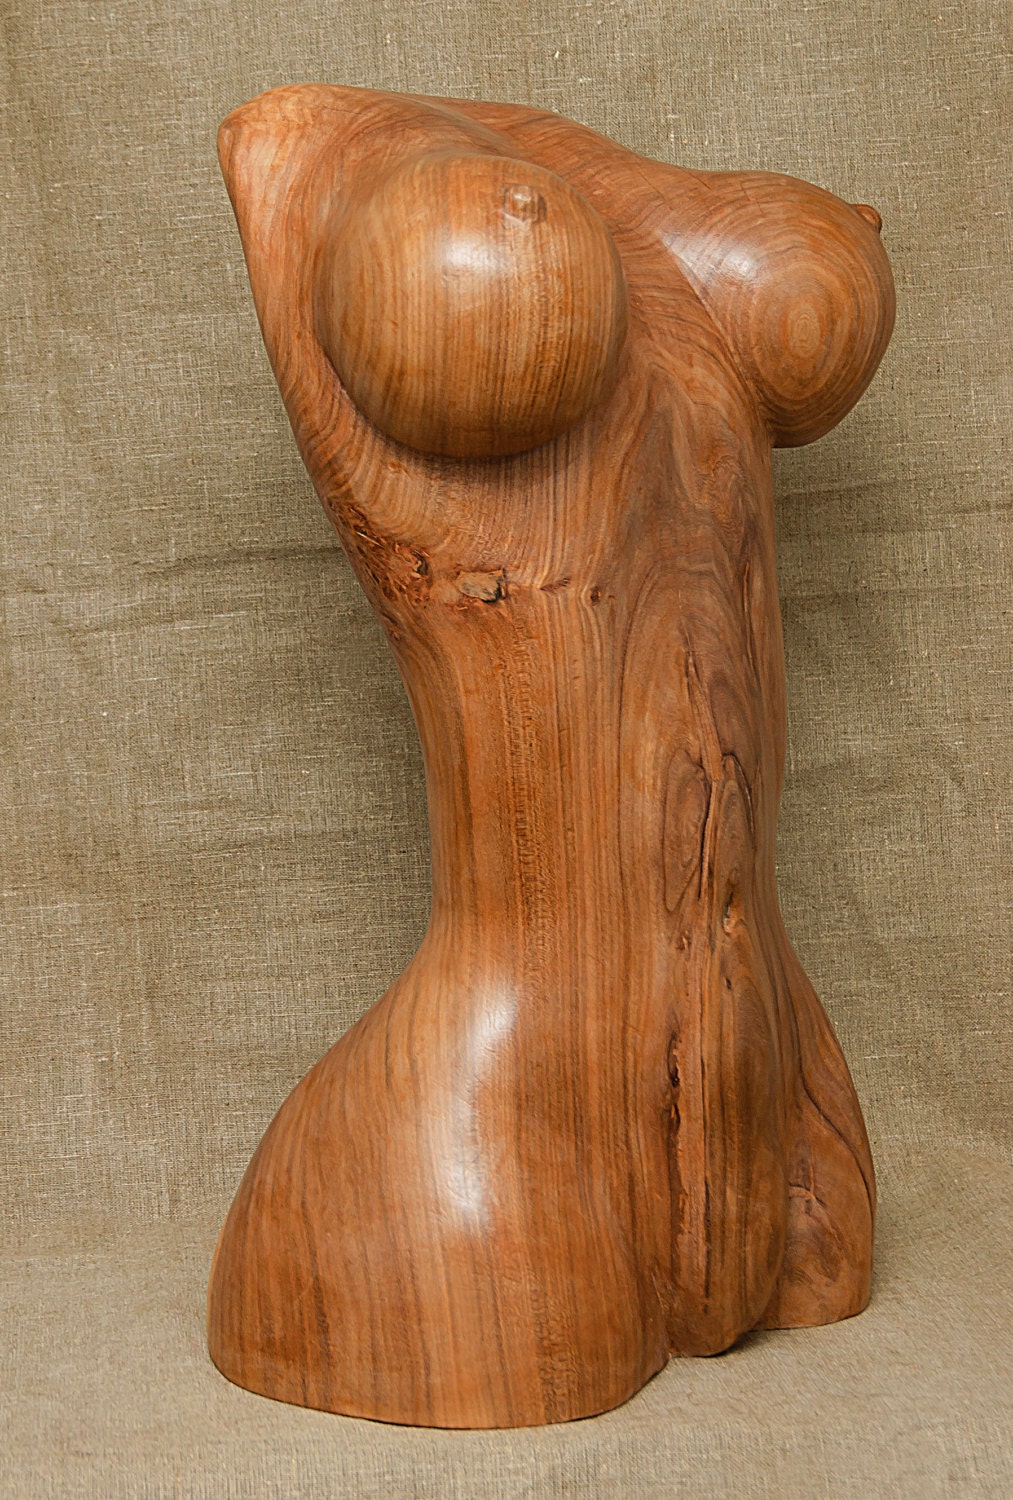 Nude Wood Carving Images 116